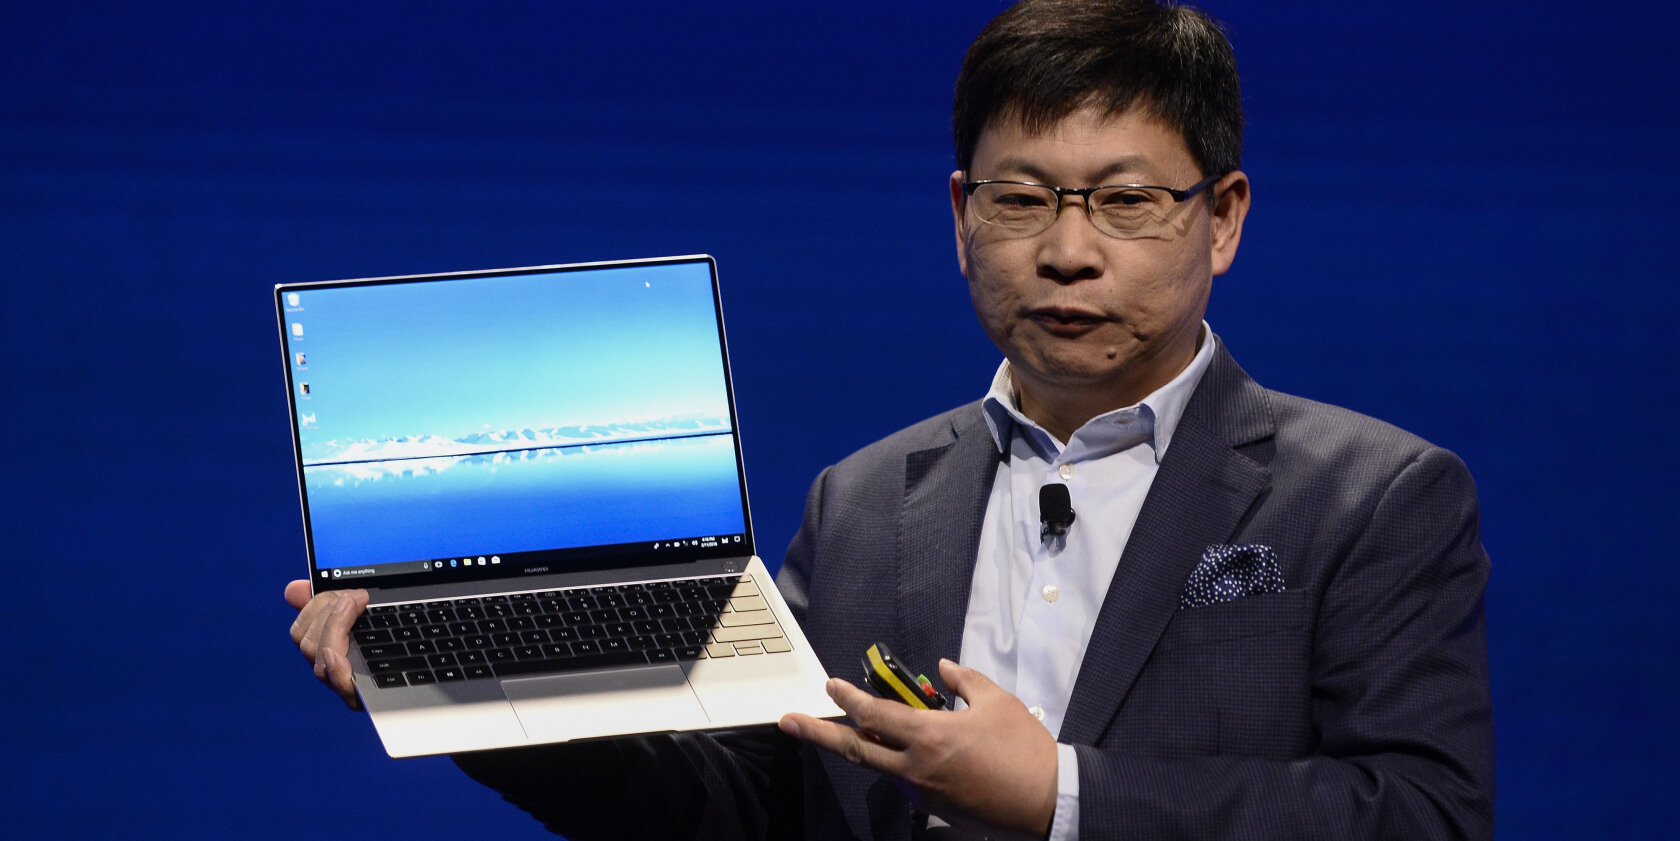 Huawei unveiled its new MateBook X Pro laptop